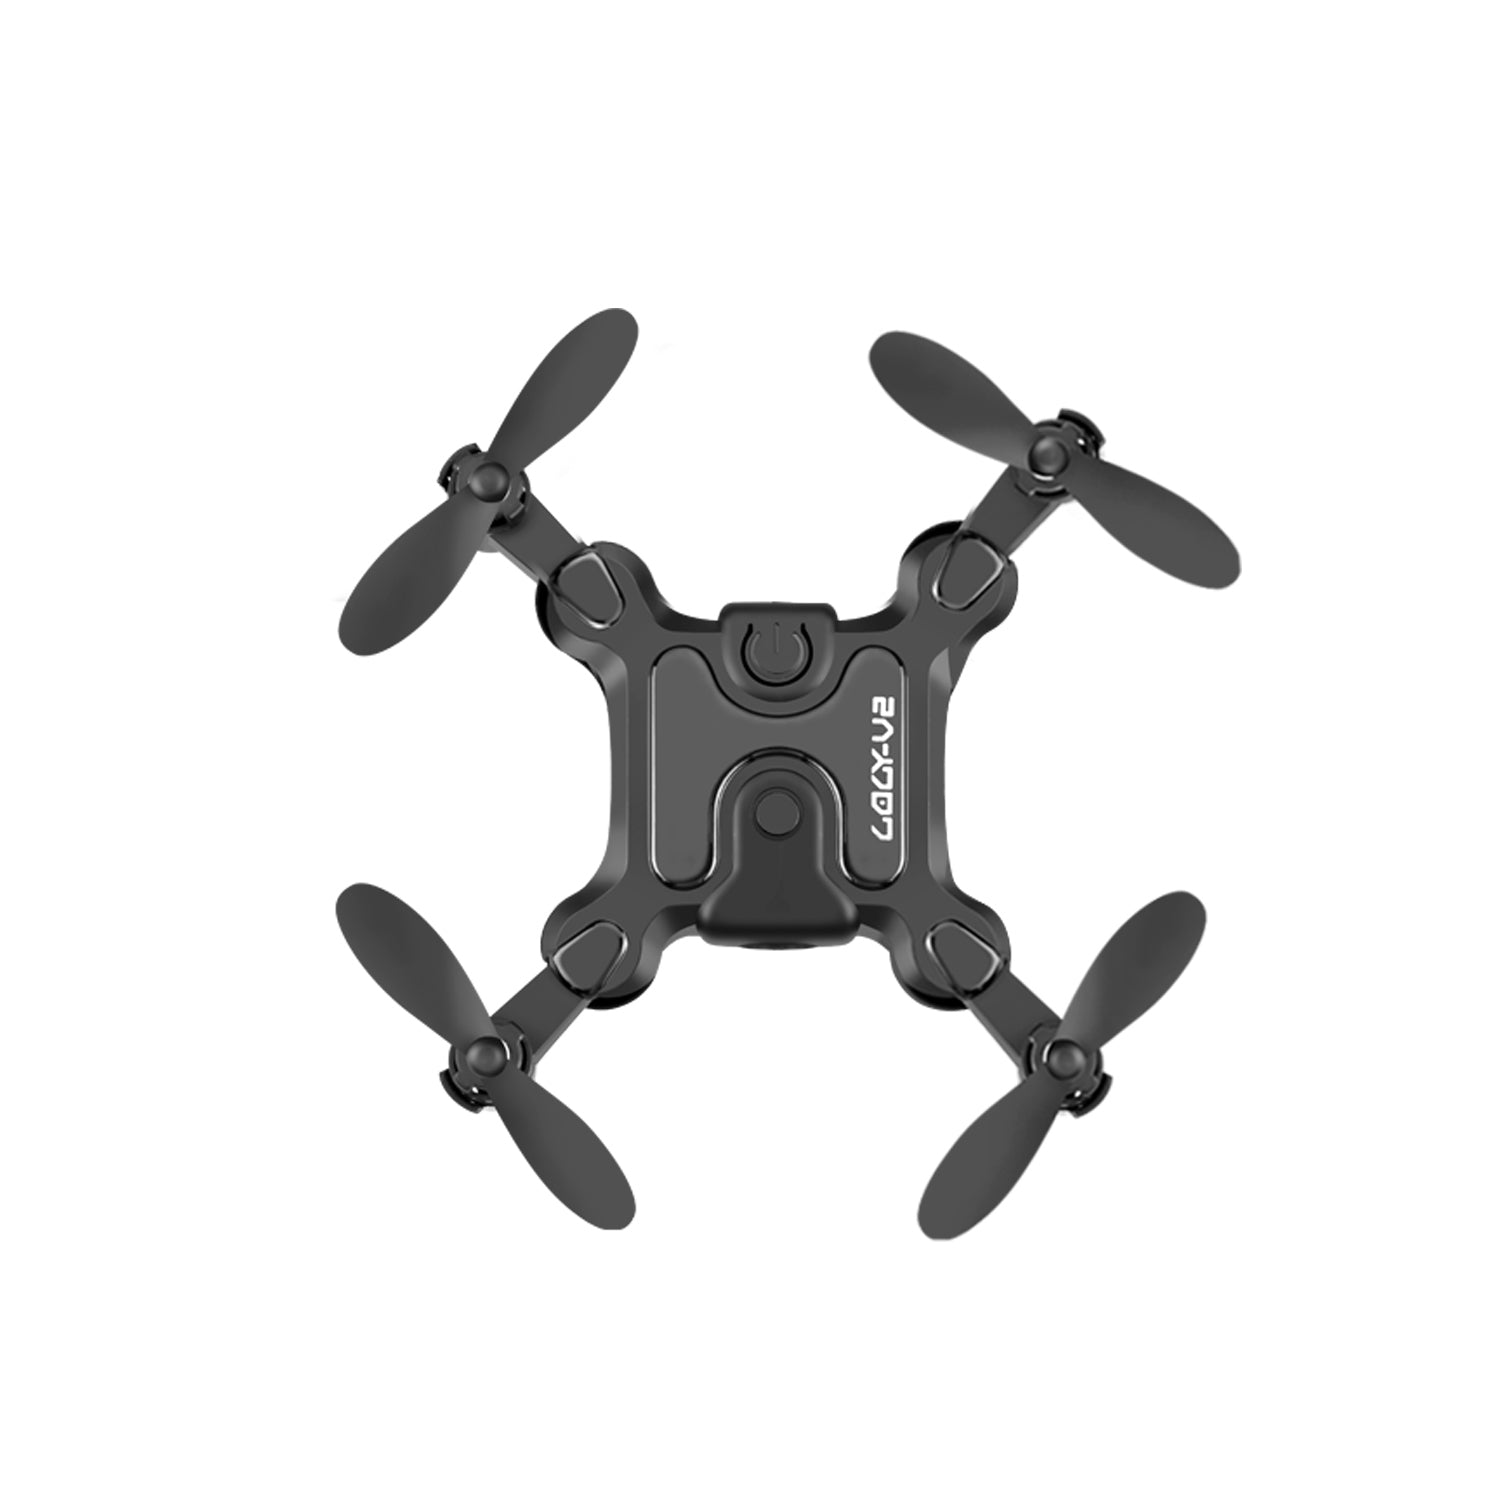 4DRC 4D-V2 Mini Drone with 720P Camera for adults and Kids